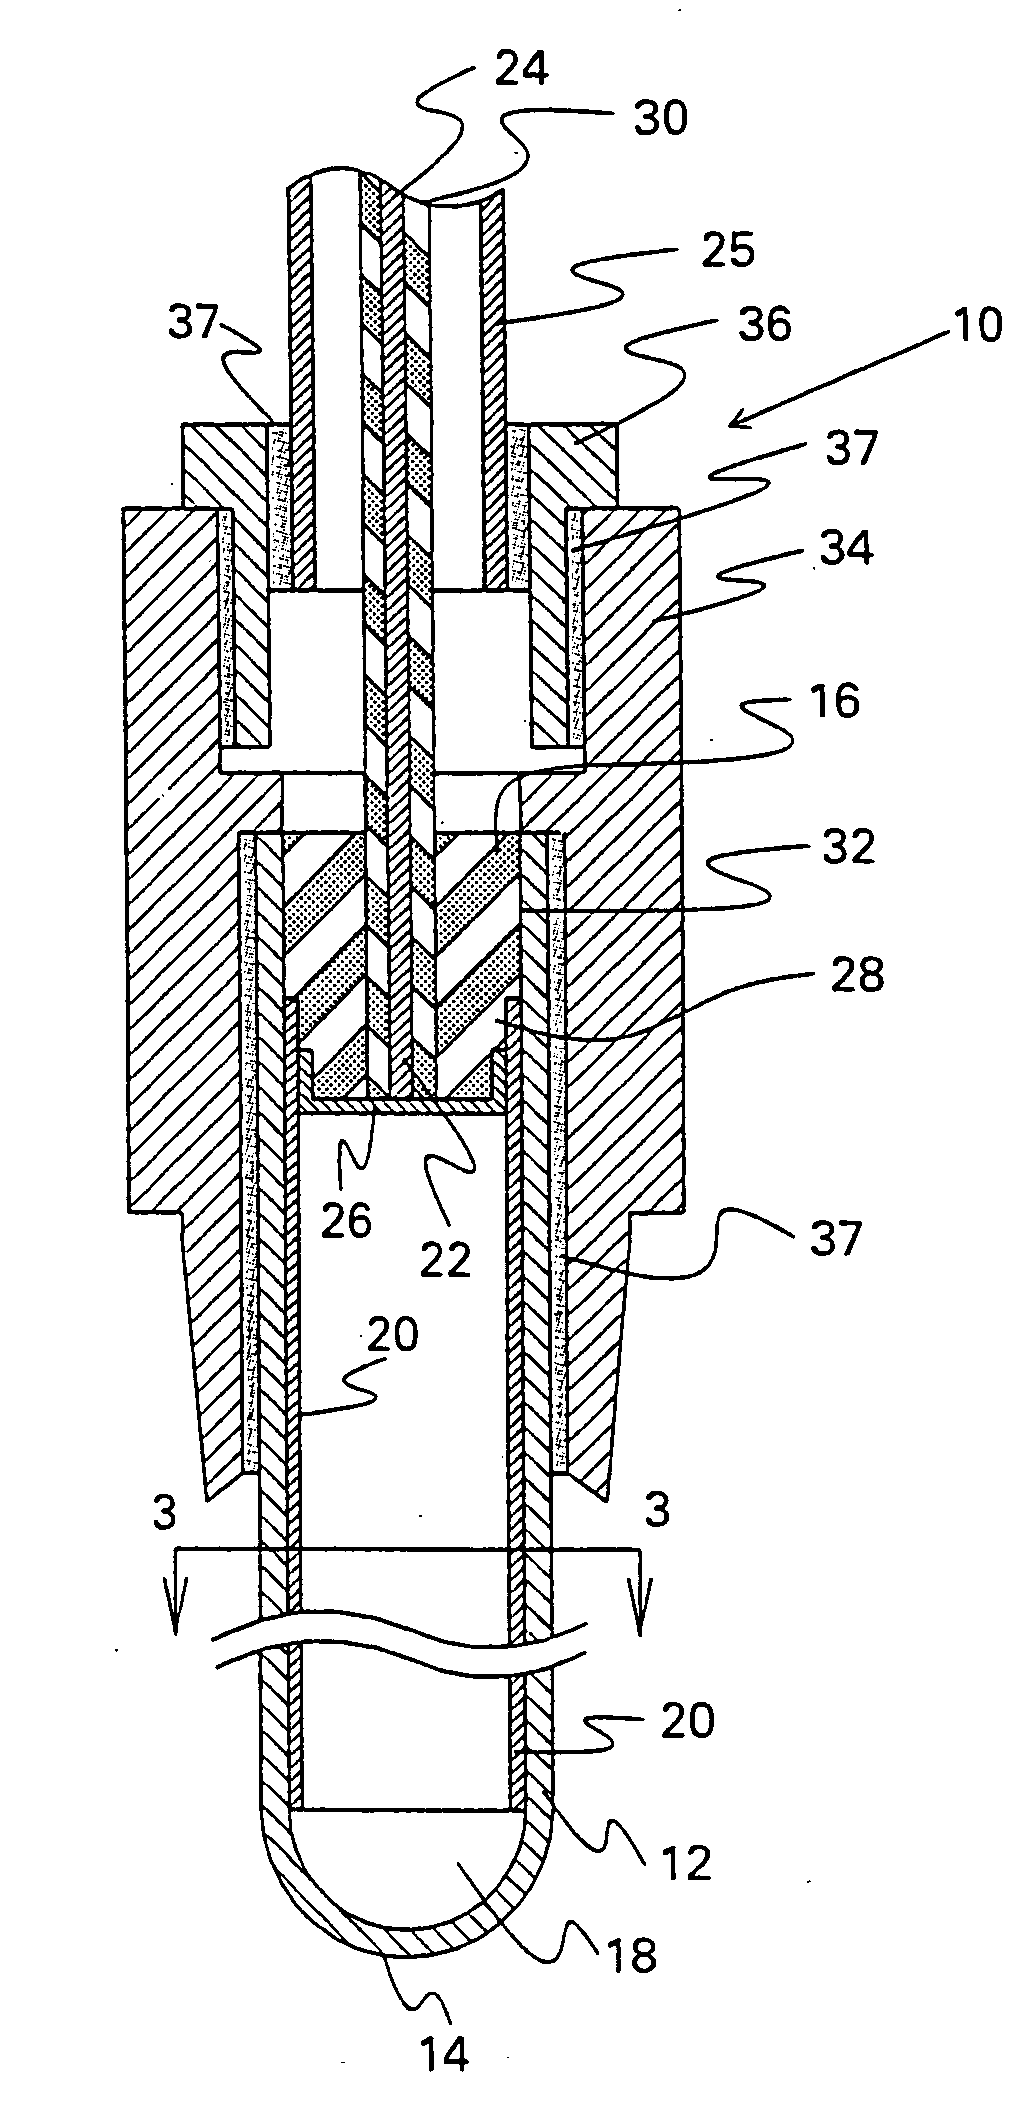 Capacitive electrostatic process for inhibiting the formation of biofilm deposits in membrane-separation systems